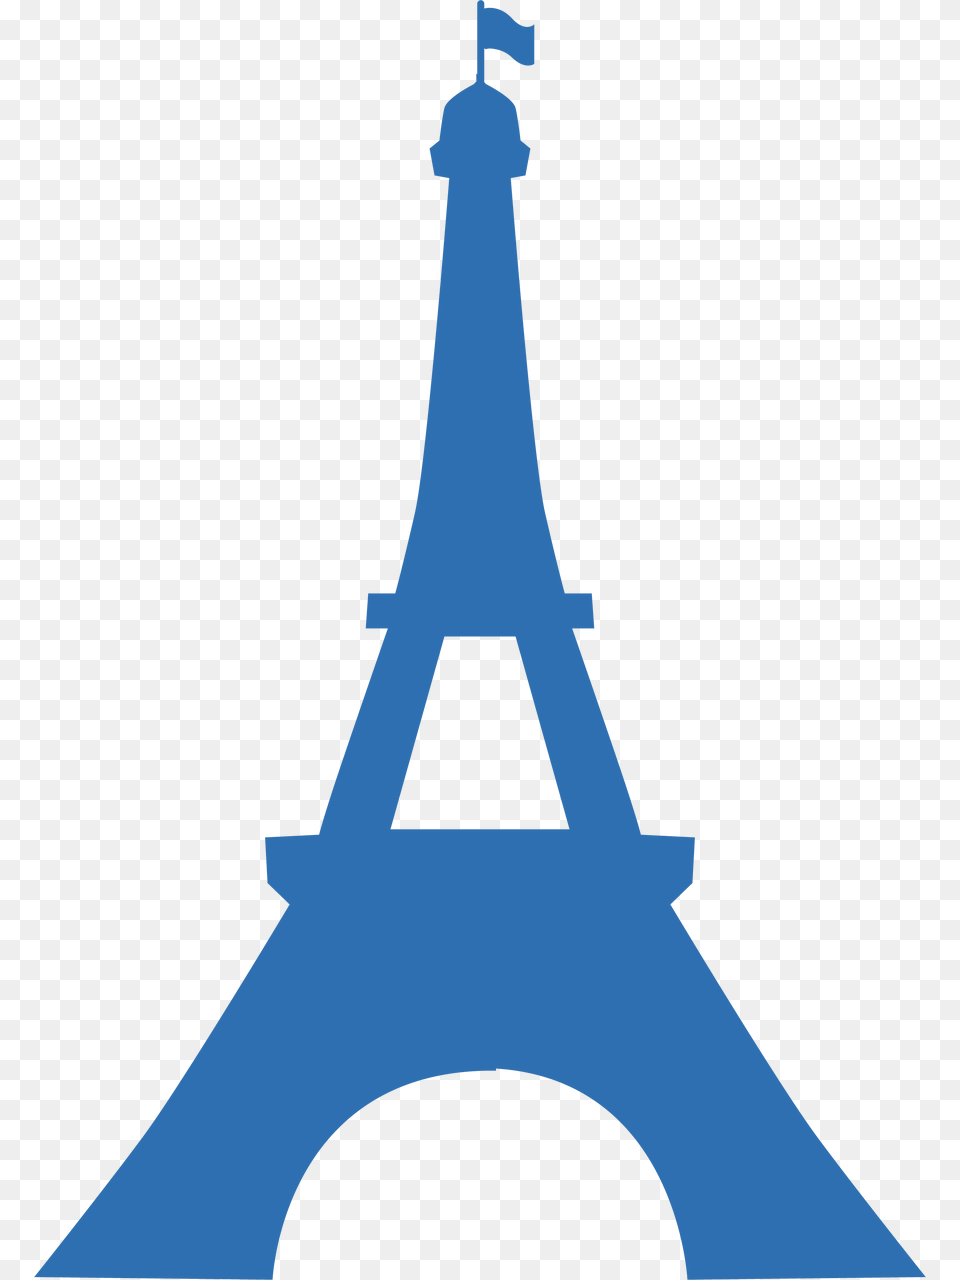 Leaning Tower Of Pisa Clipart Eiffel Tower Svg, Architecture, Building, Spire, Bell Tower Png